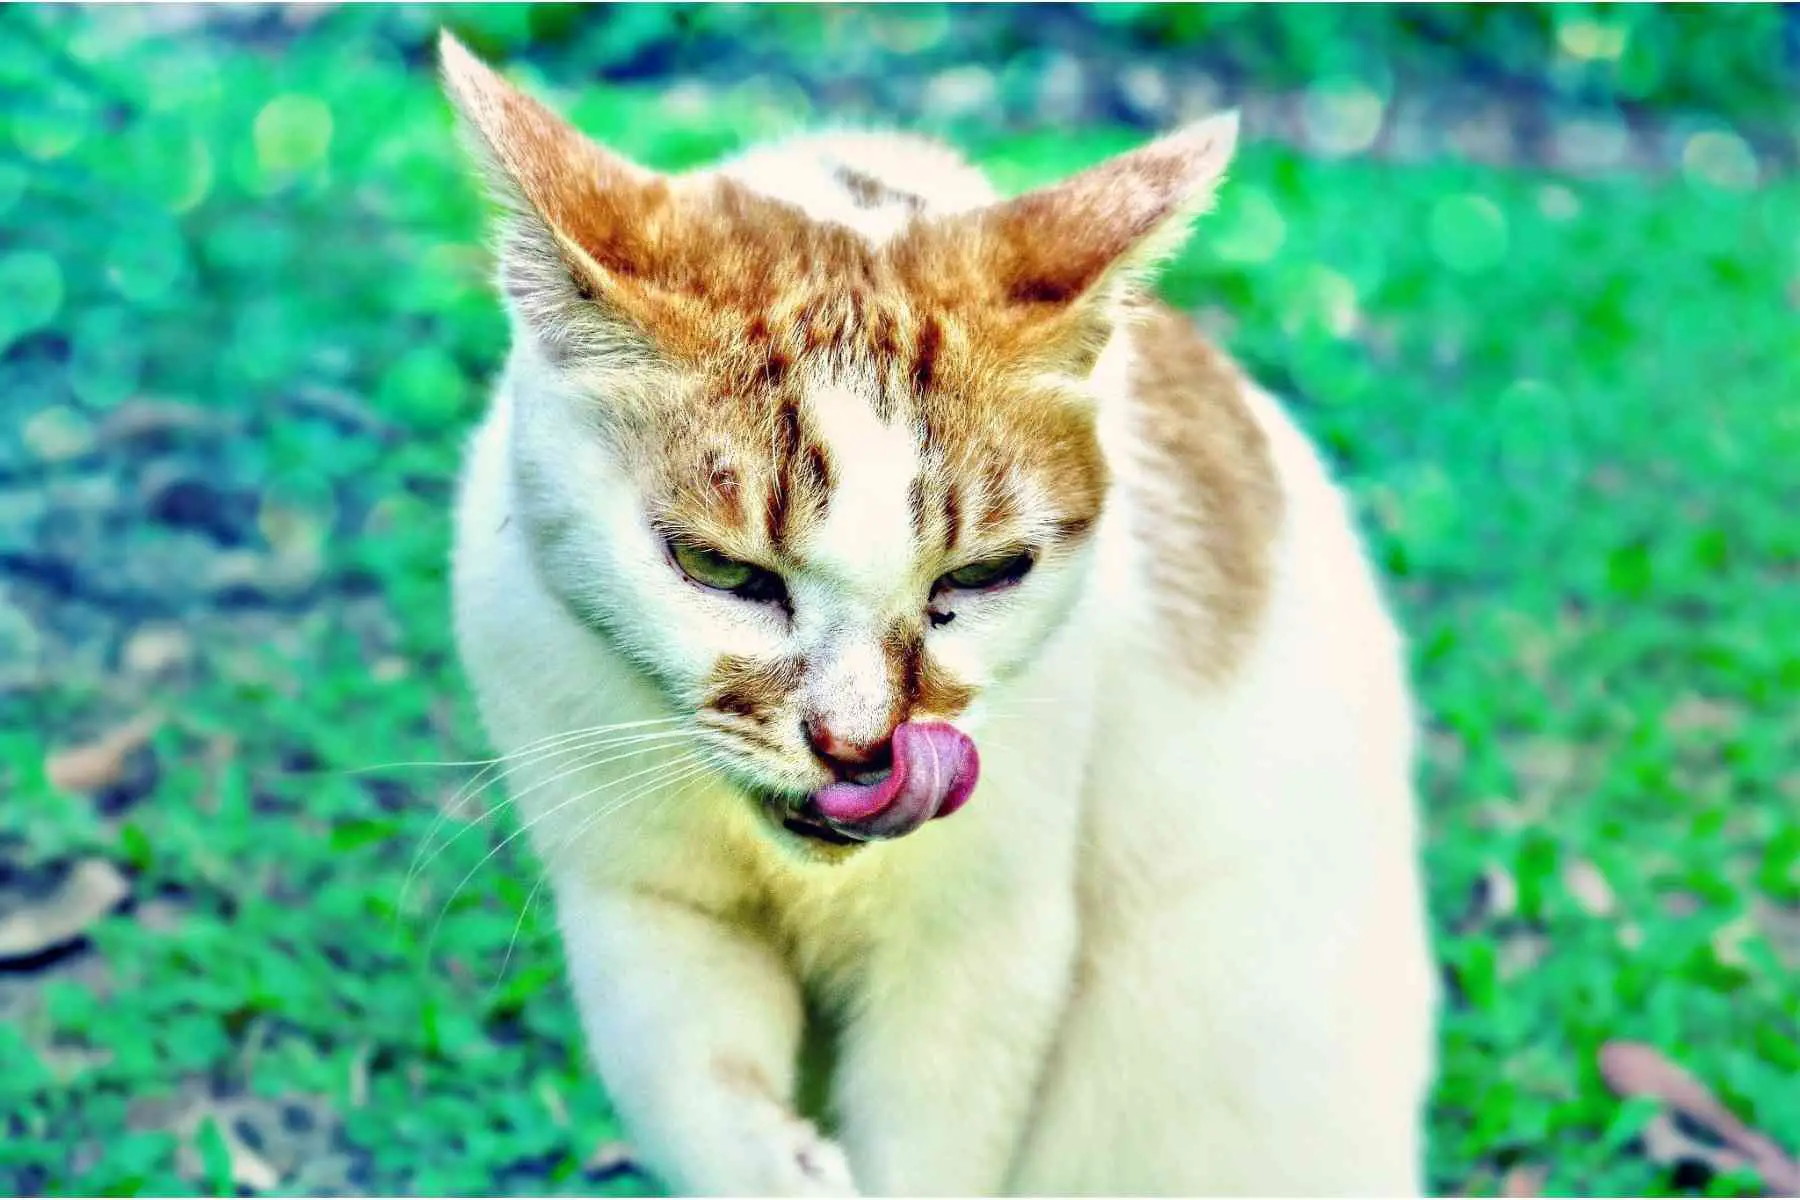 Cat with black boogers licking its nose